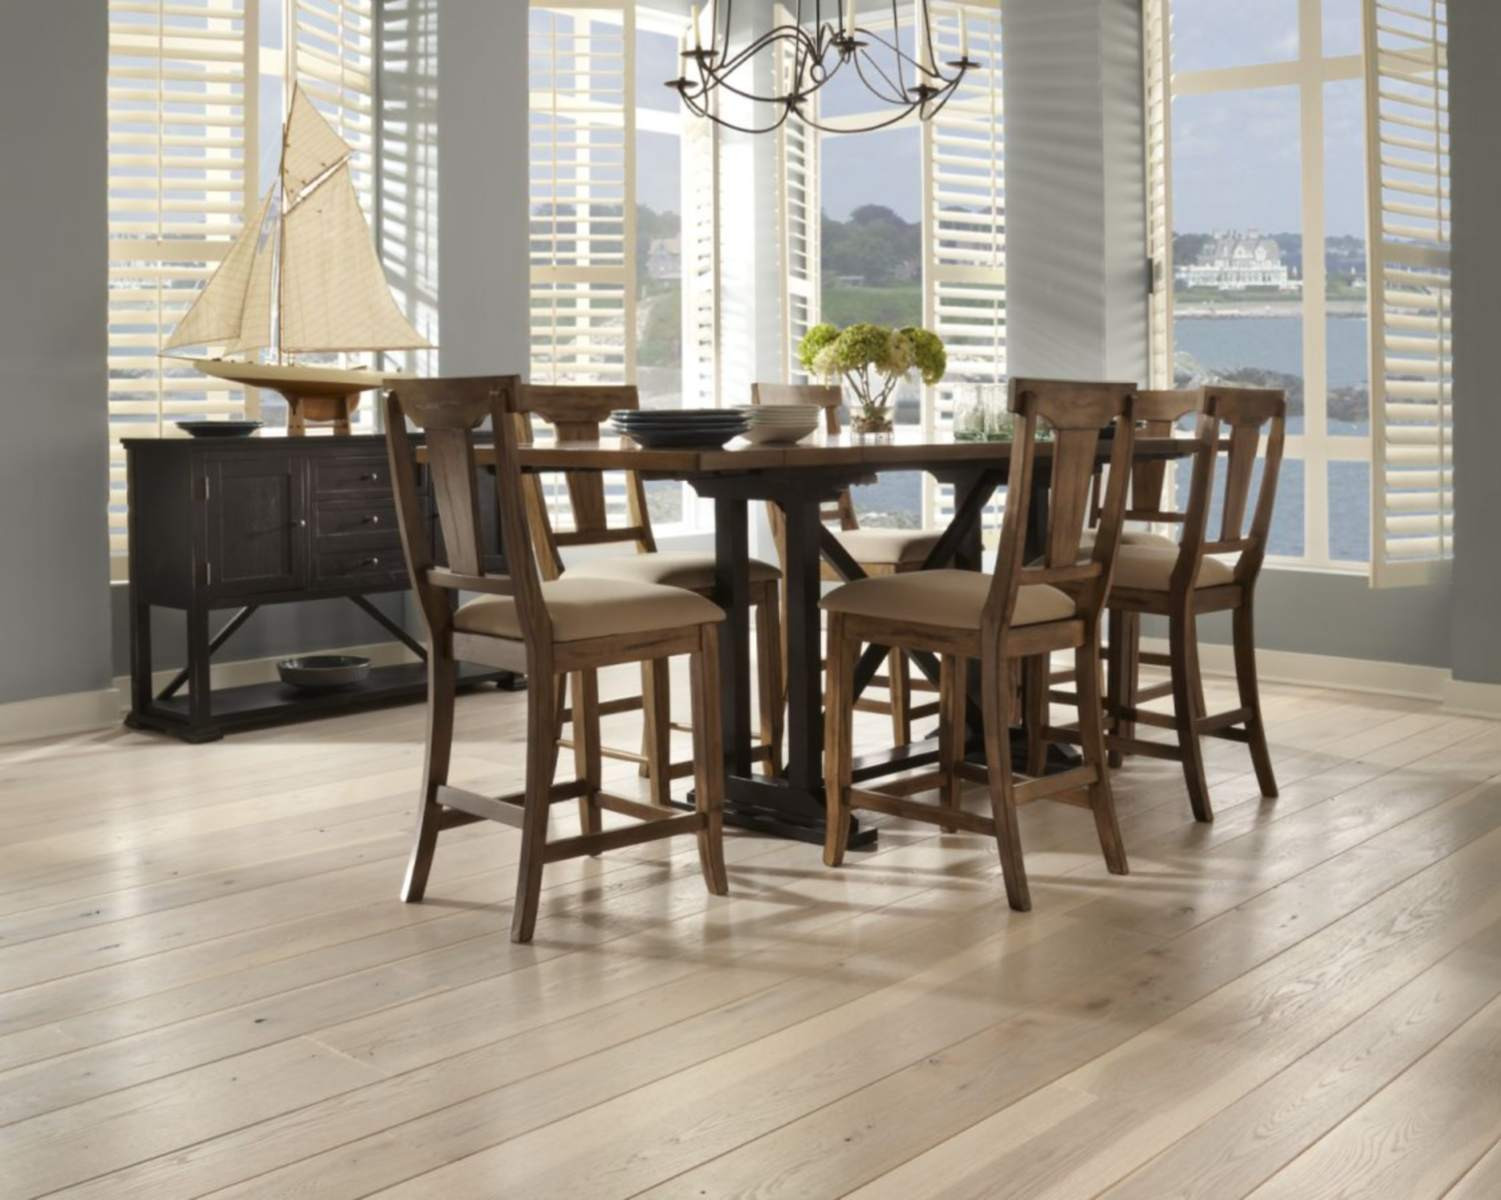 hardwood flooring grades quality of top 5 brands for solid hardwood flooring regarding a dining room with carlisle hickorys wide plank flooring